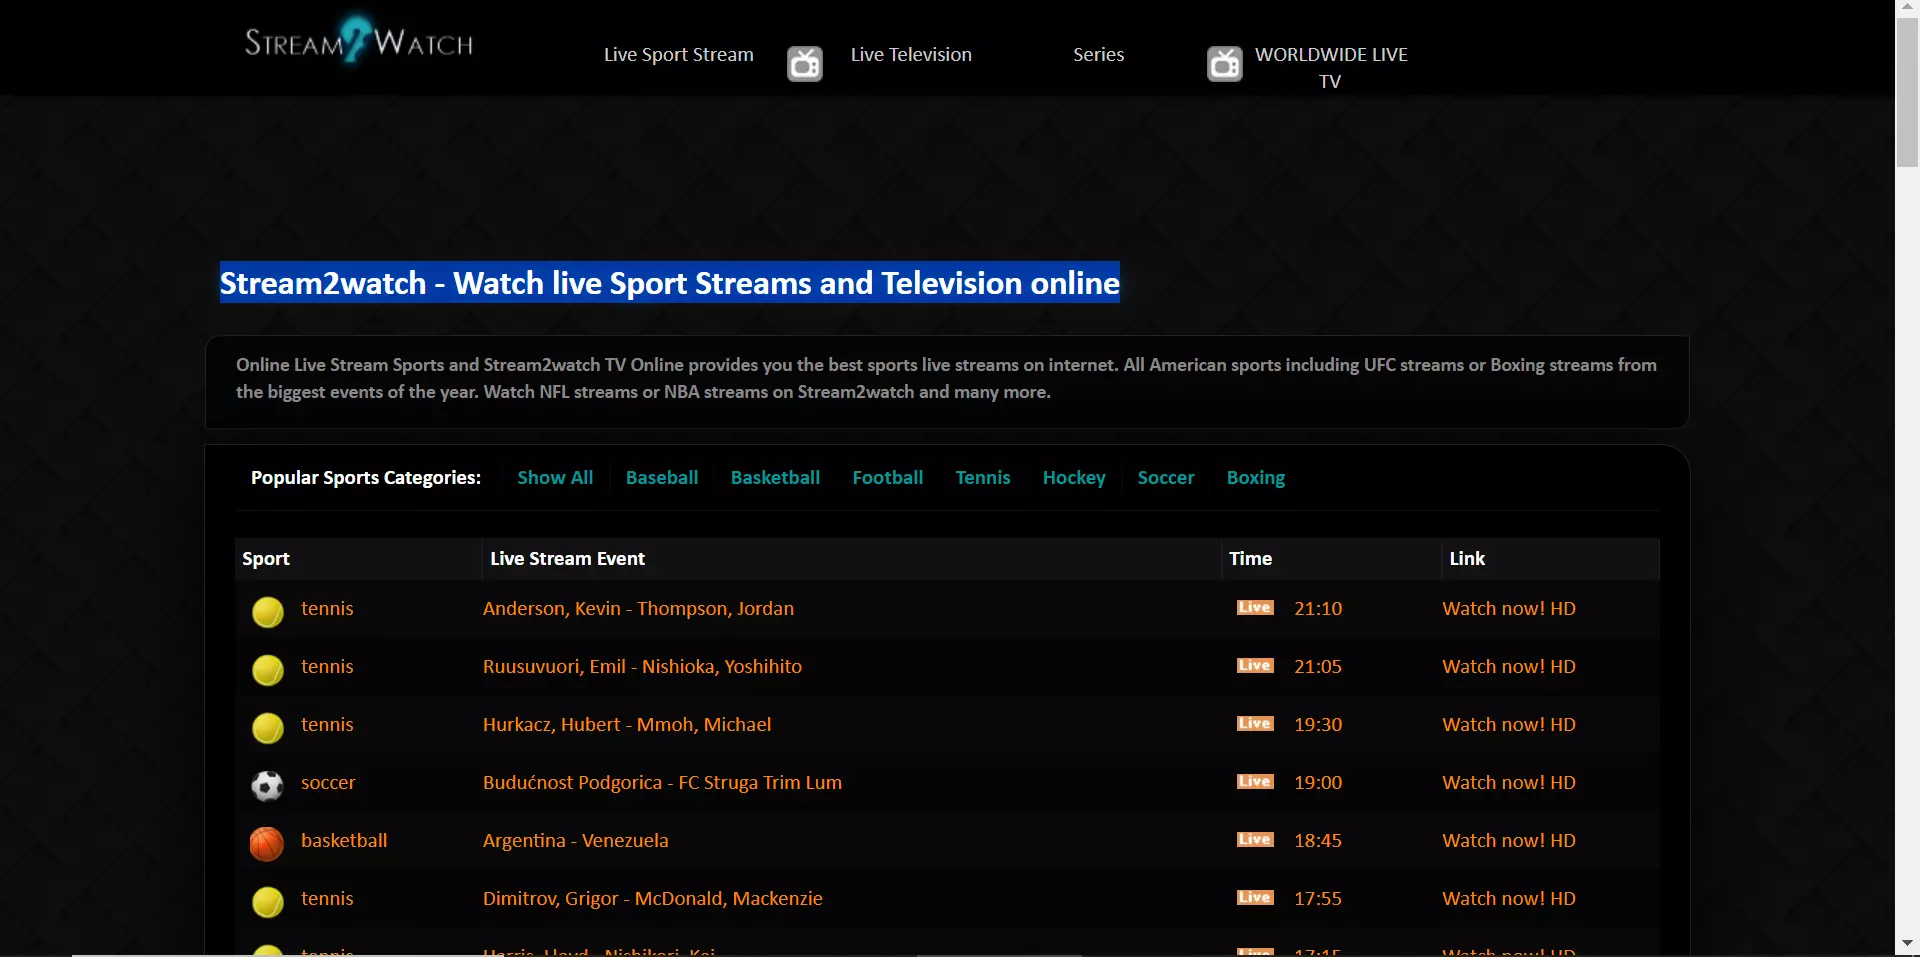 Stream2watch - Watch live Sport Streams and Television online